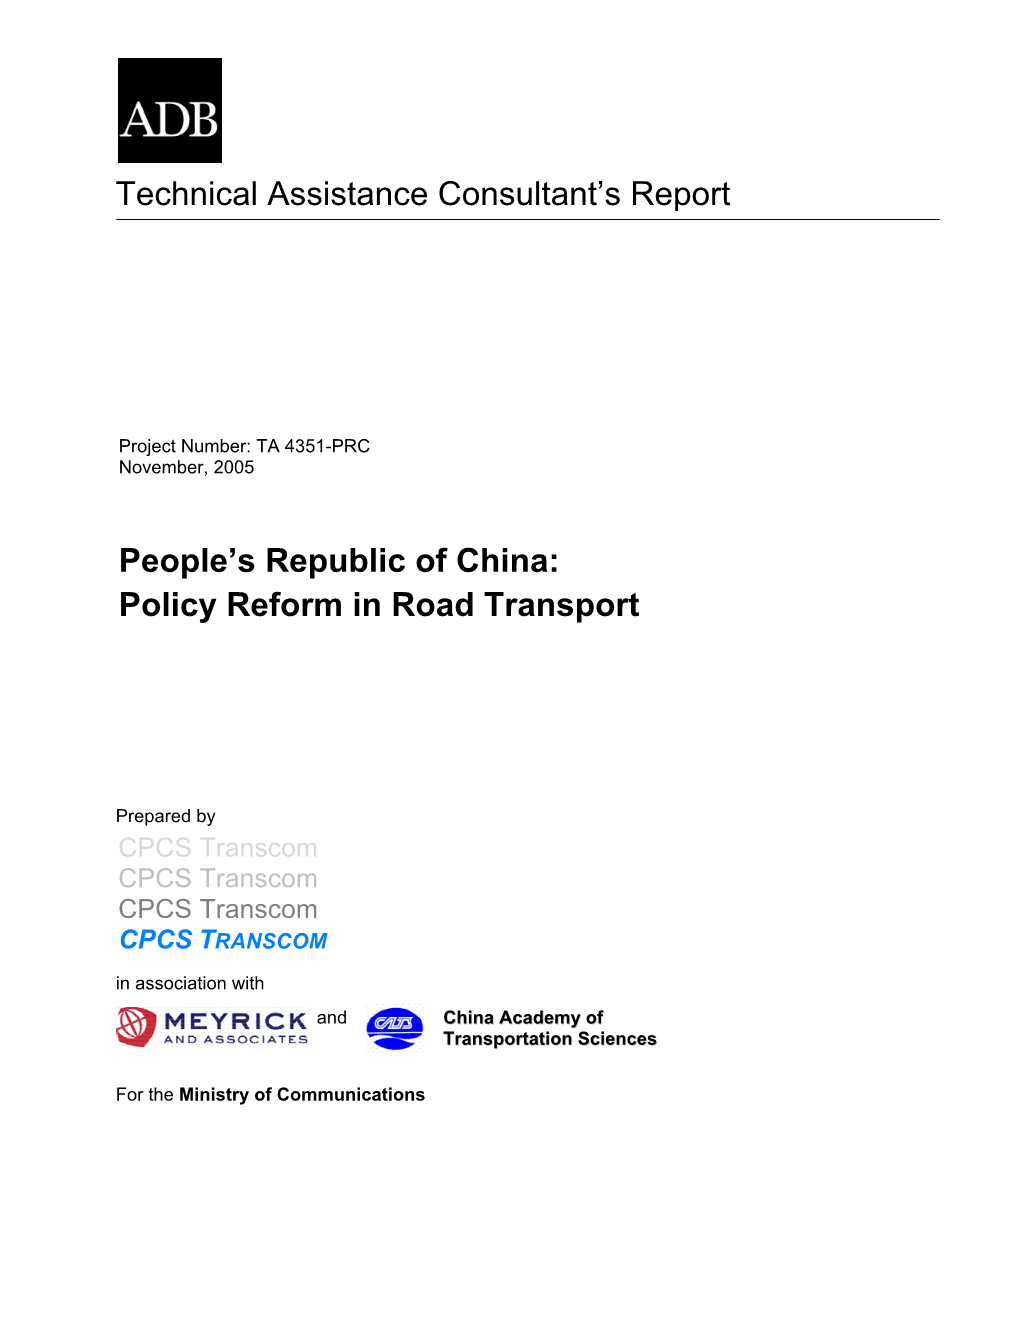 Technical Assistance Consultant's Report People's Republic of China